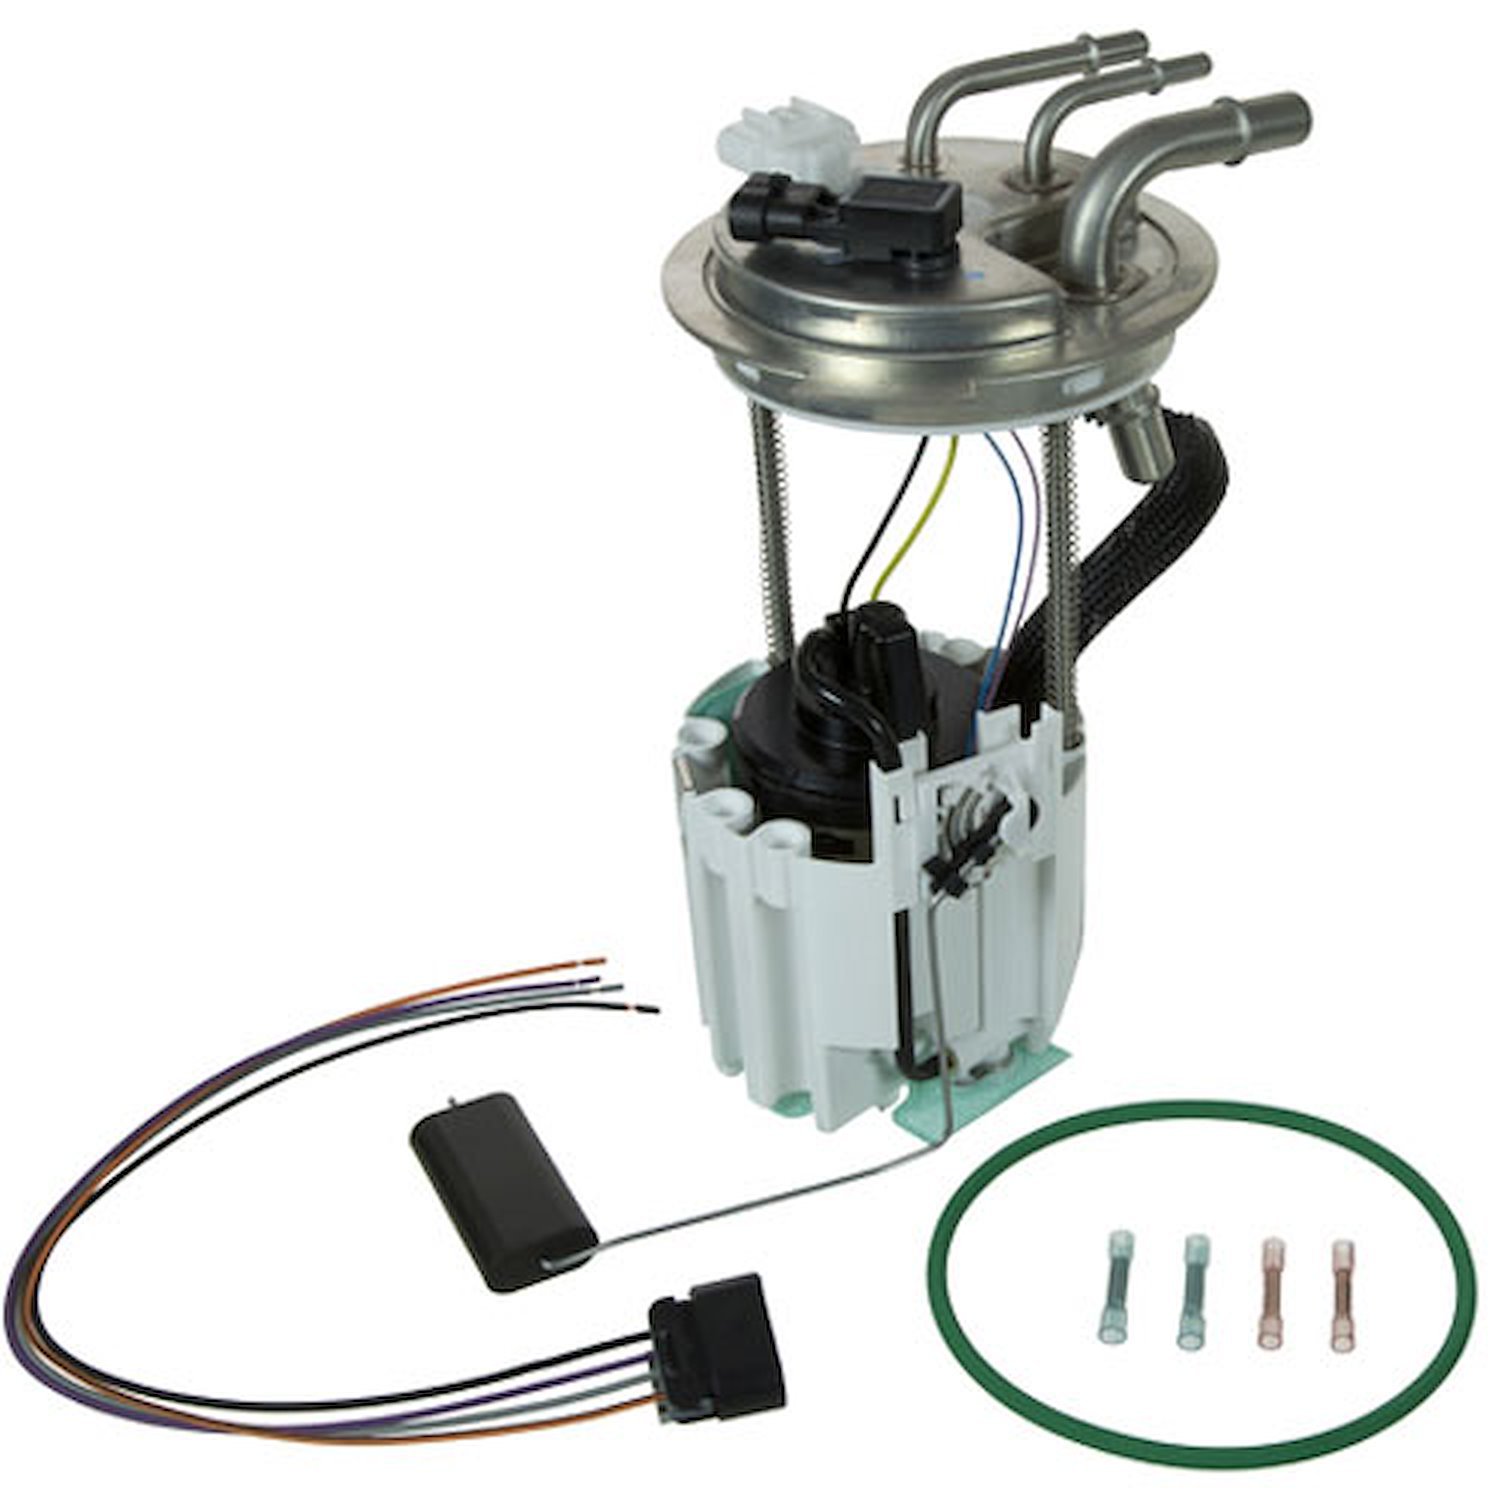 OE GM Replacement Electric Fuel Pump Module Assembly 2004-07 Cadillac Escalade ESV/EXT 6.0L/6.2L V8